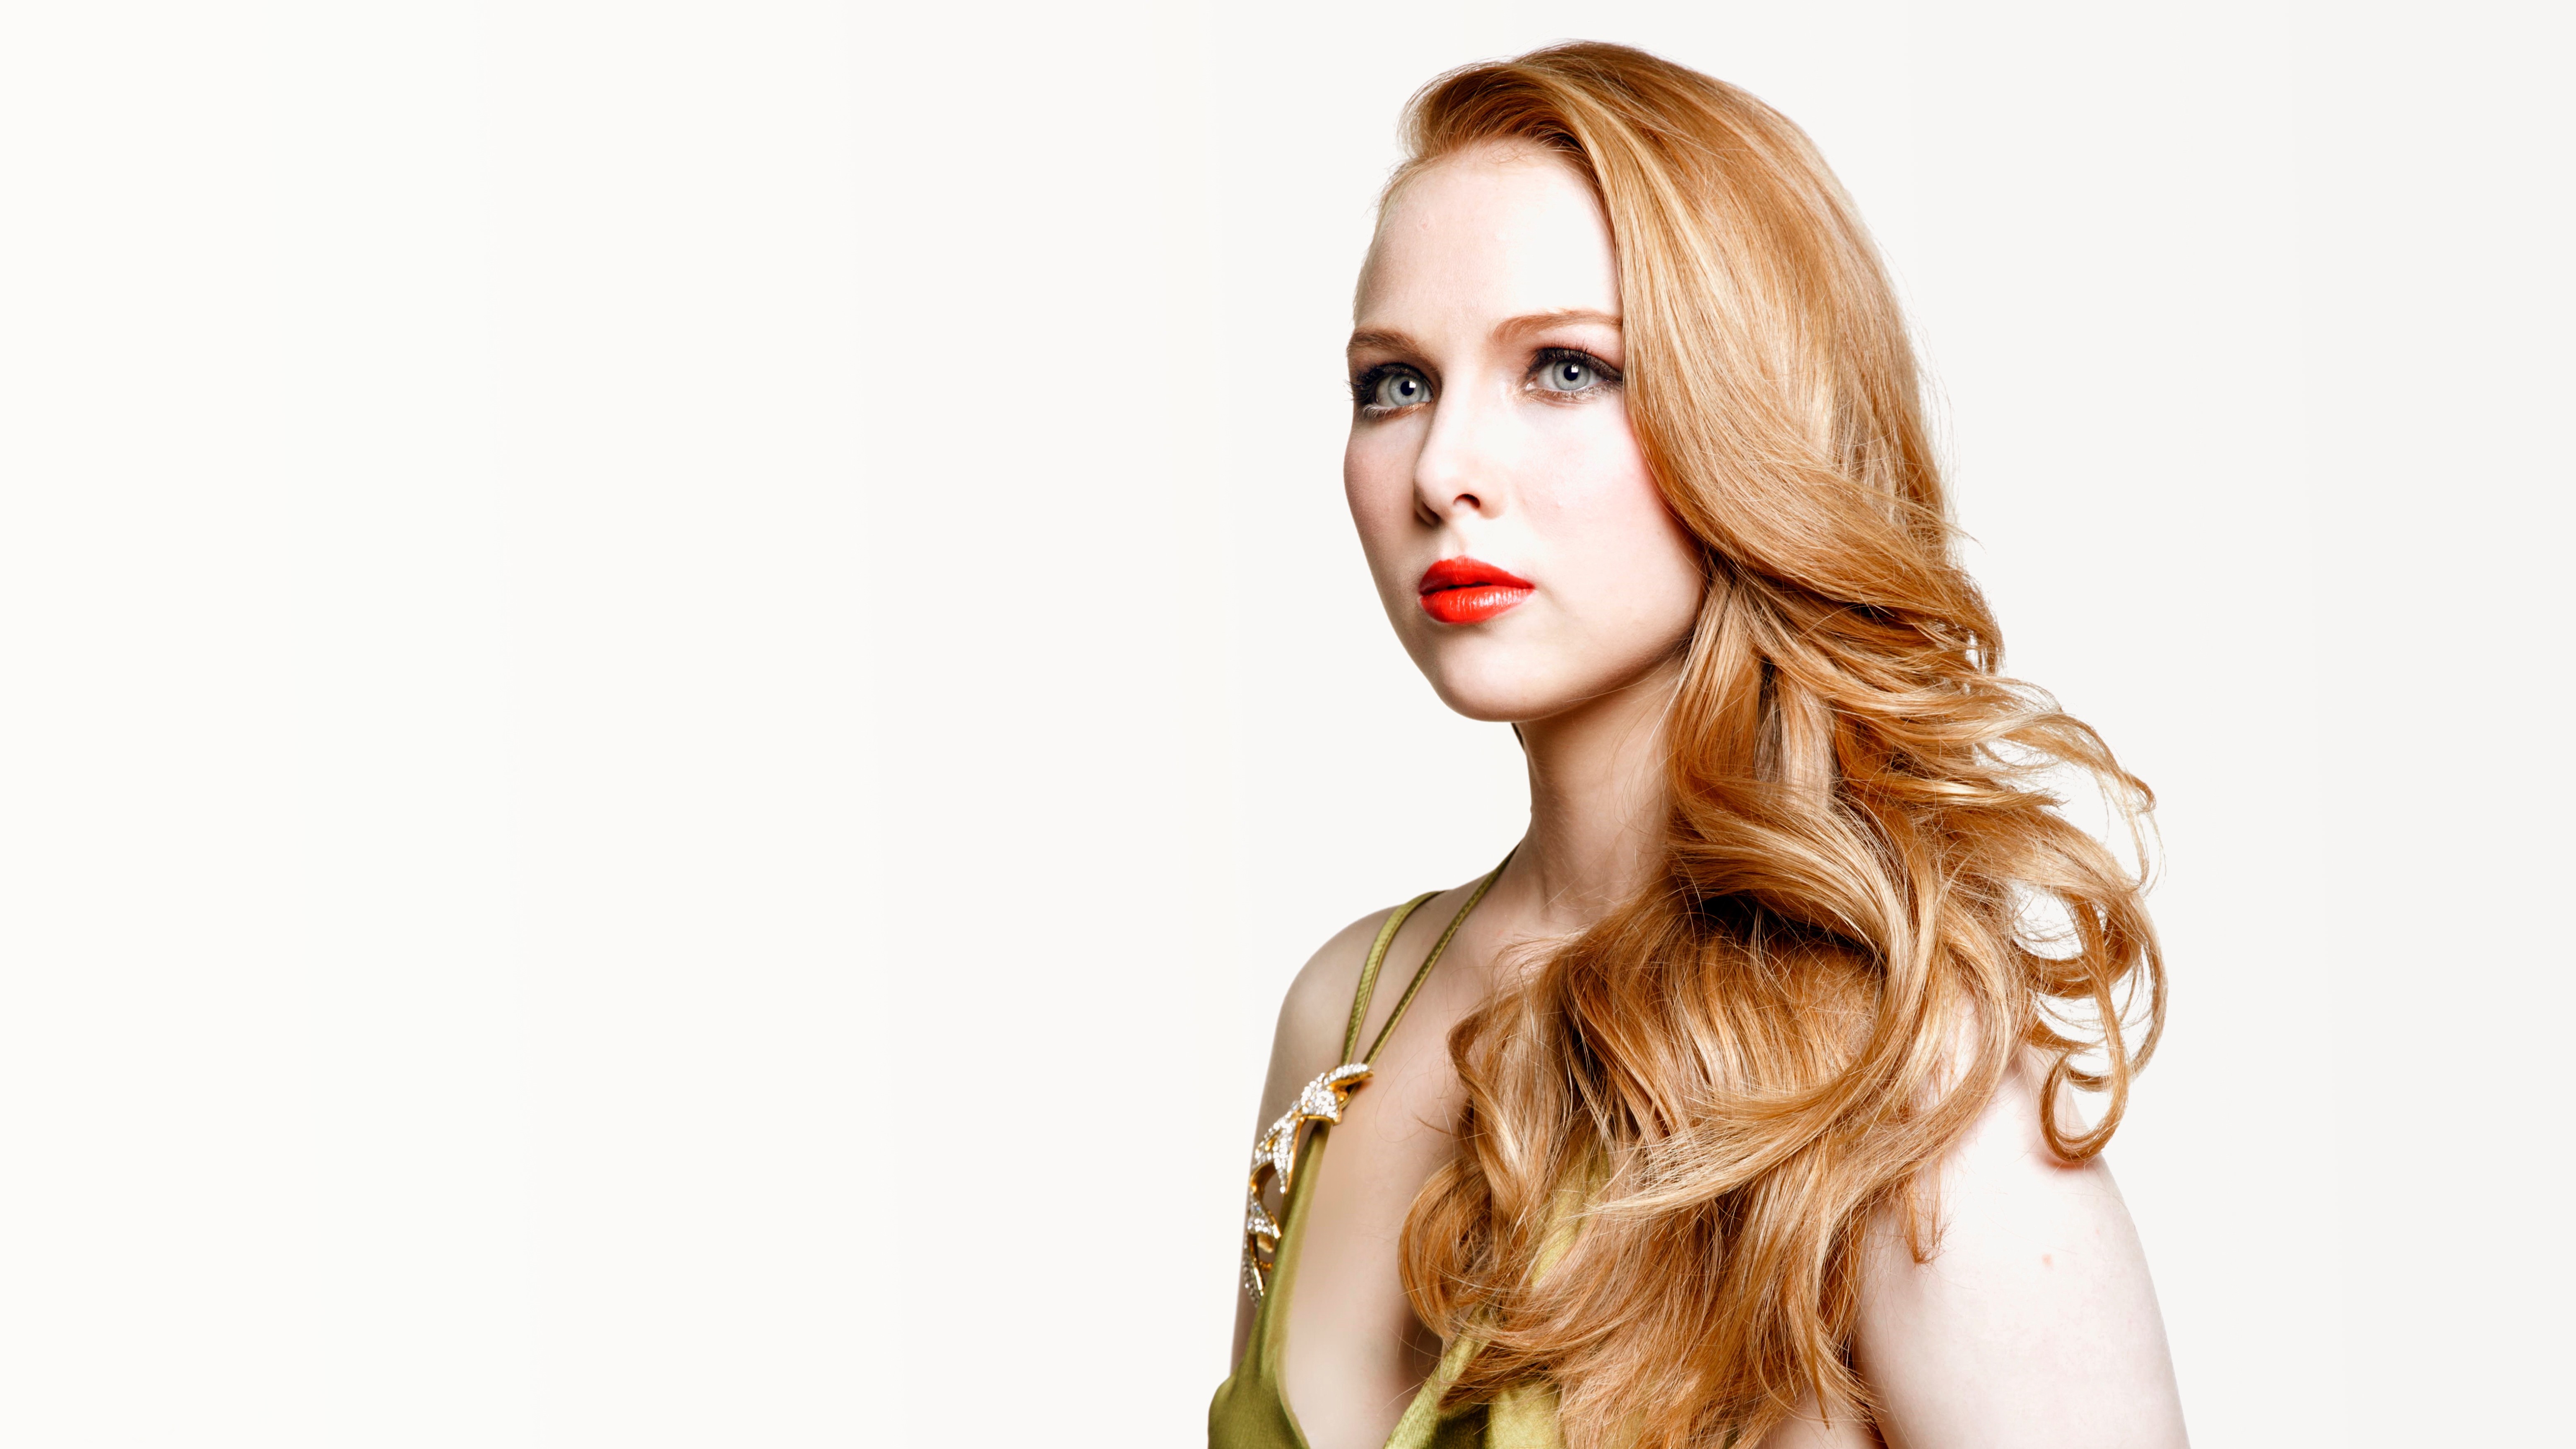 Molly C Quinn Wallpaper Image Photos Pictures Background